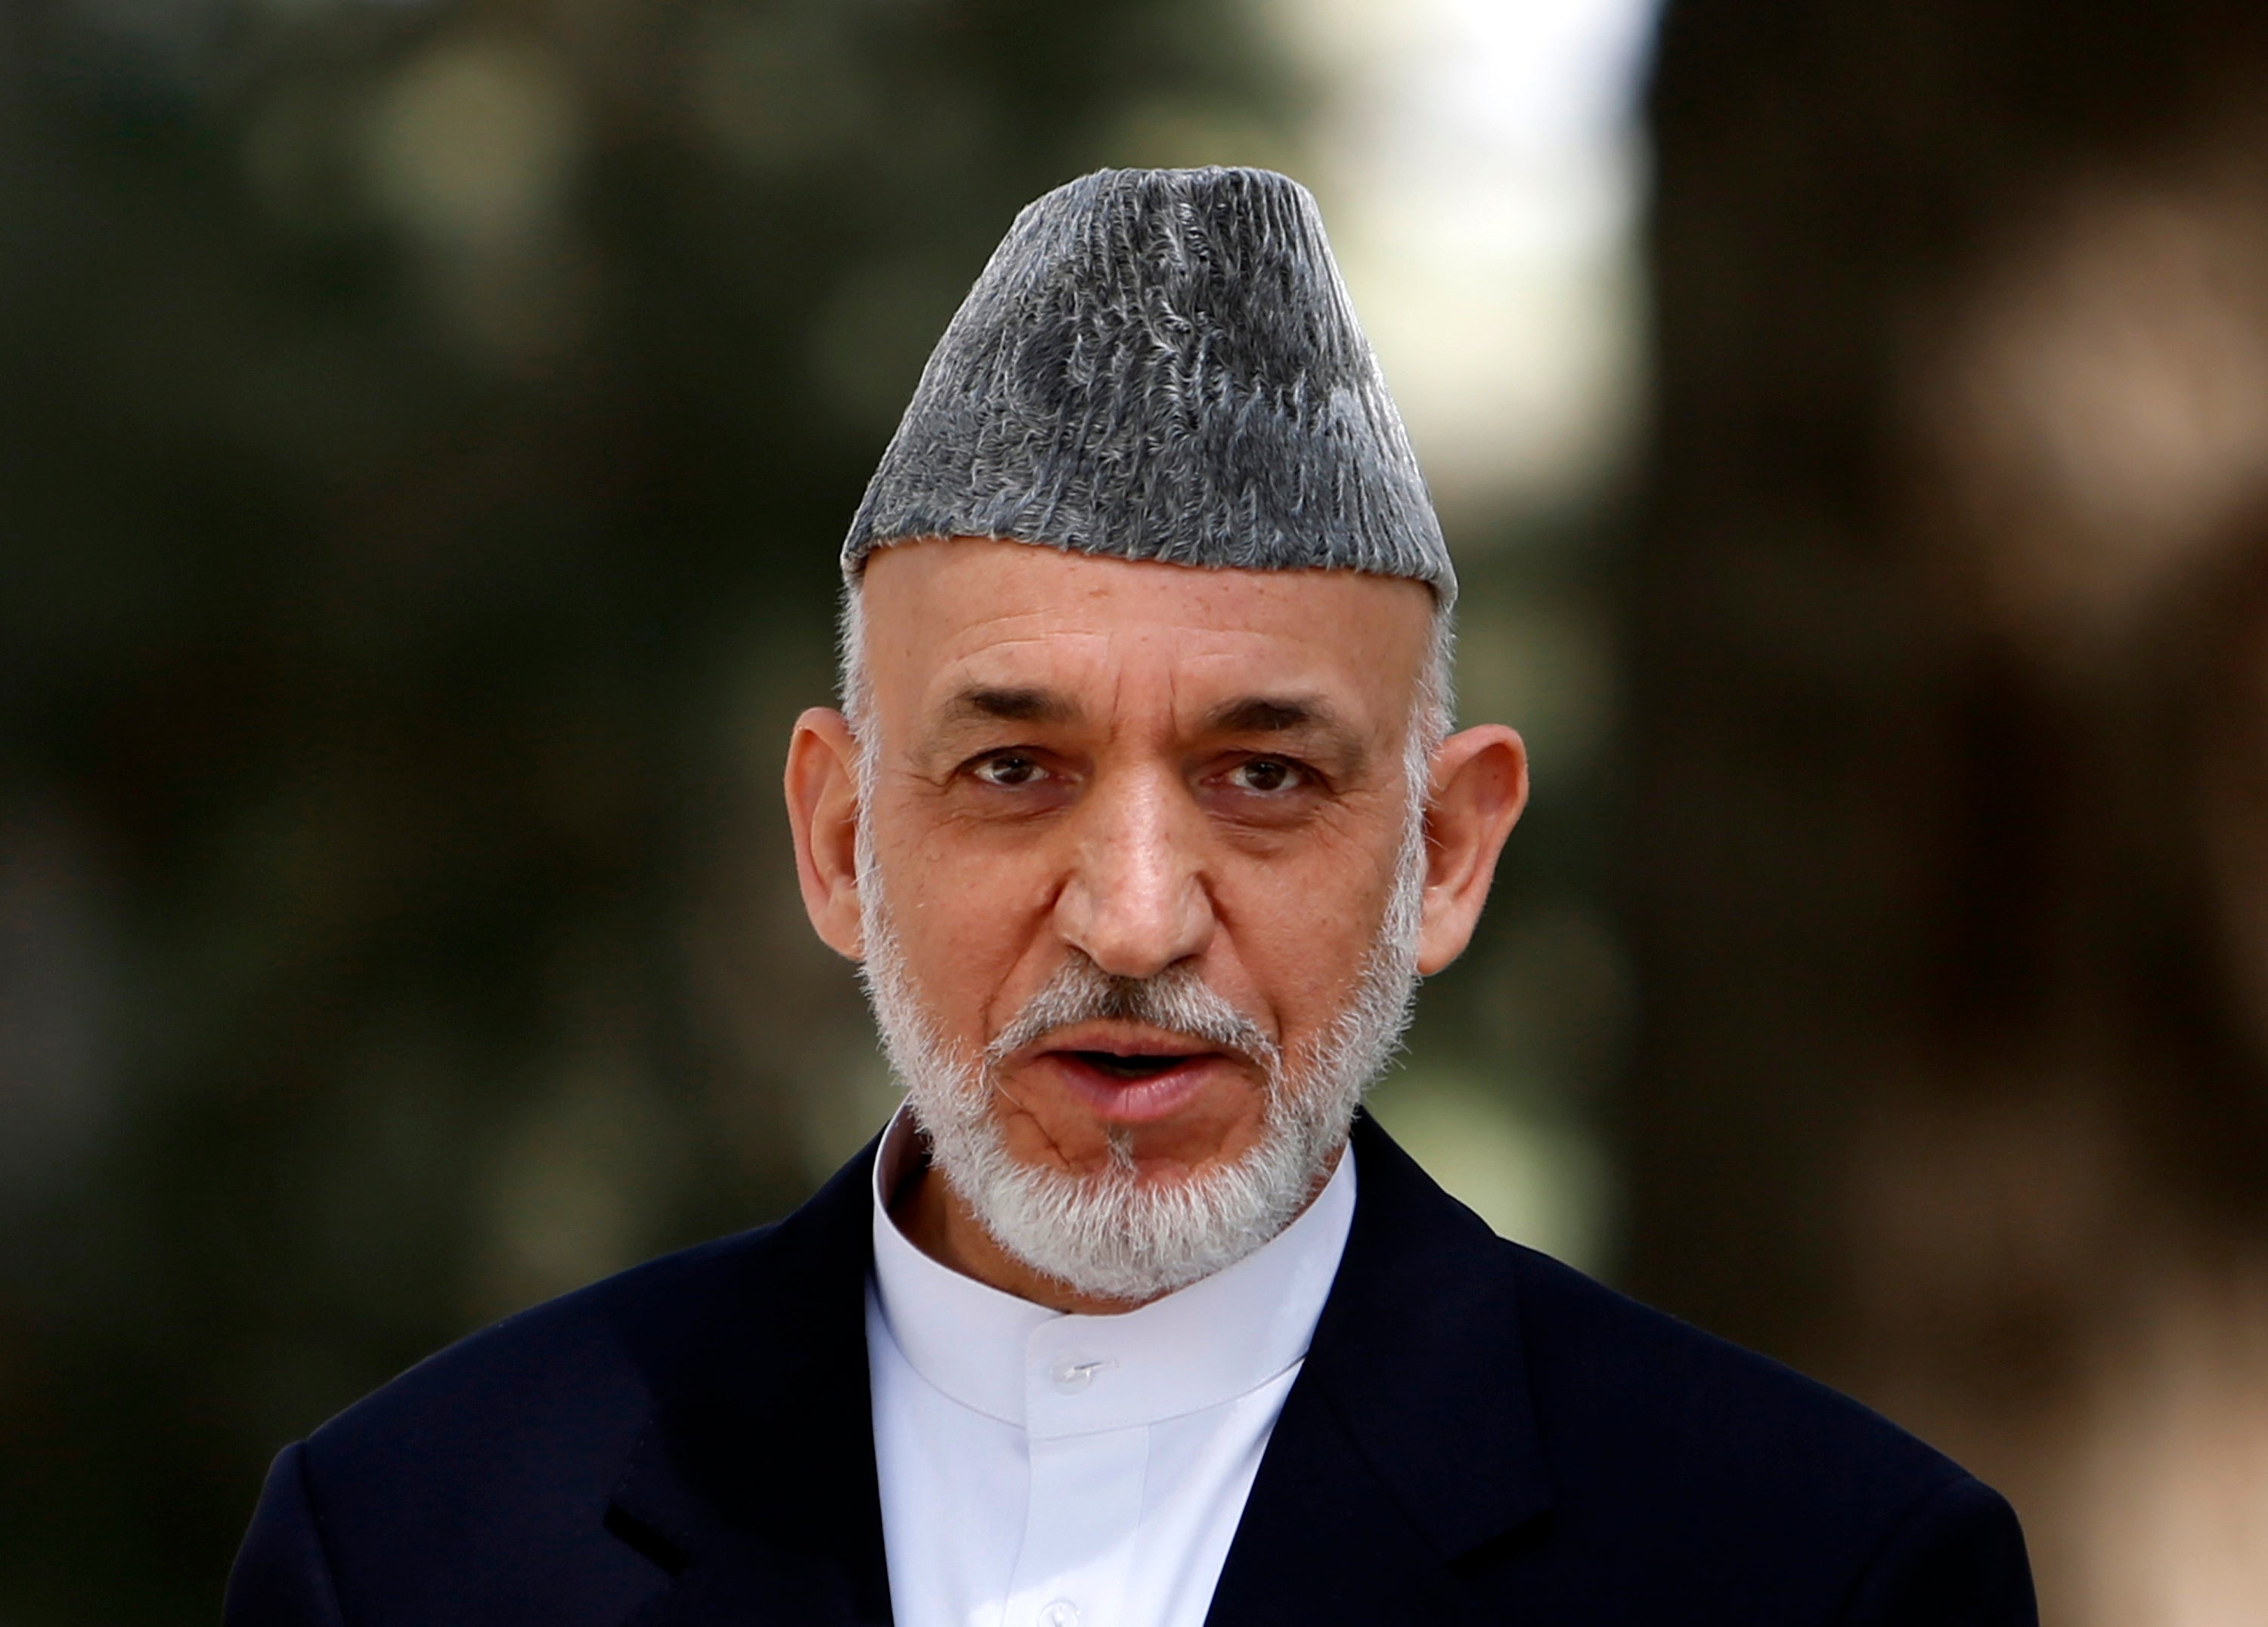 Hamid Karzai's meeting with the panda has delighted social media users online